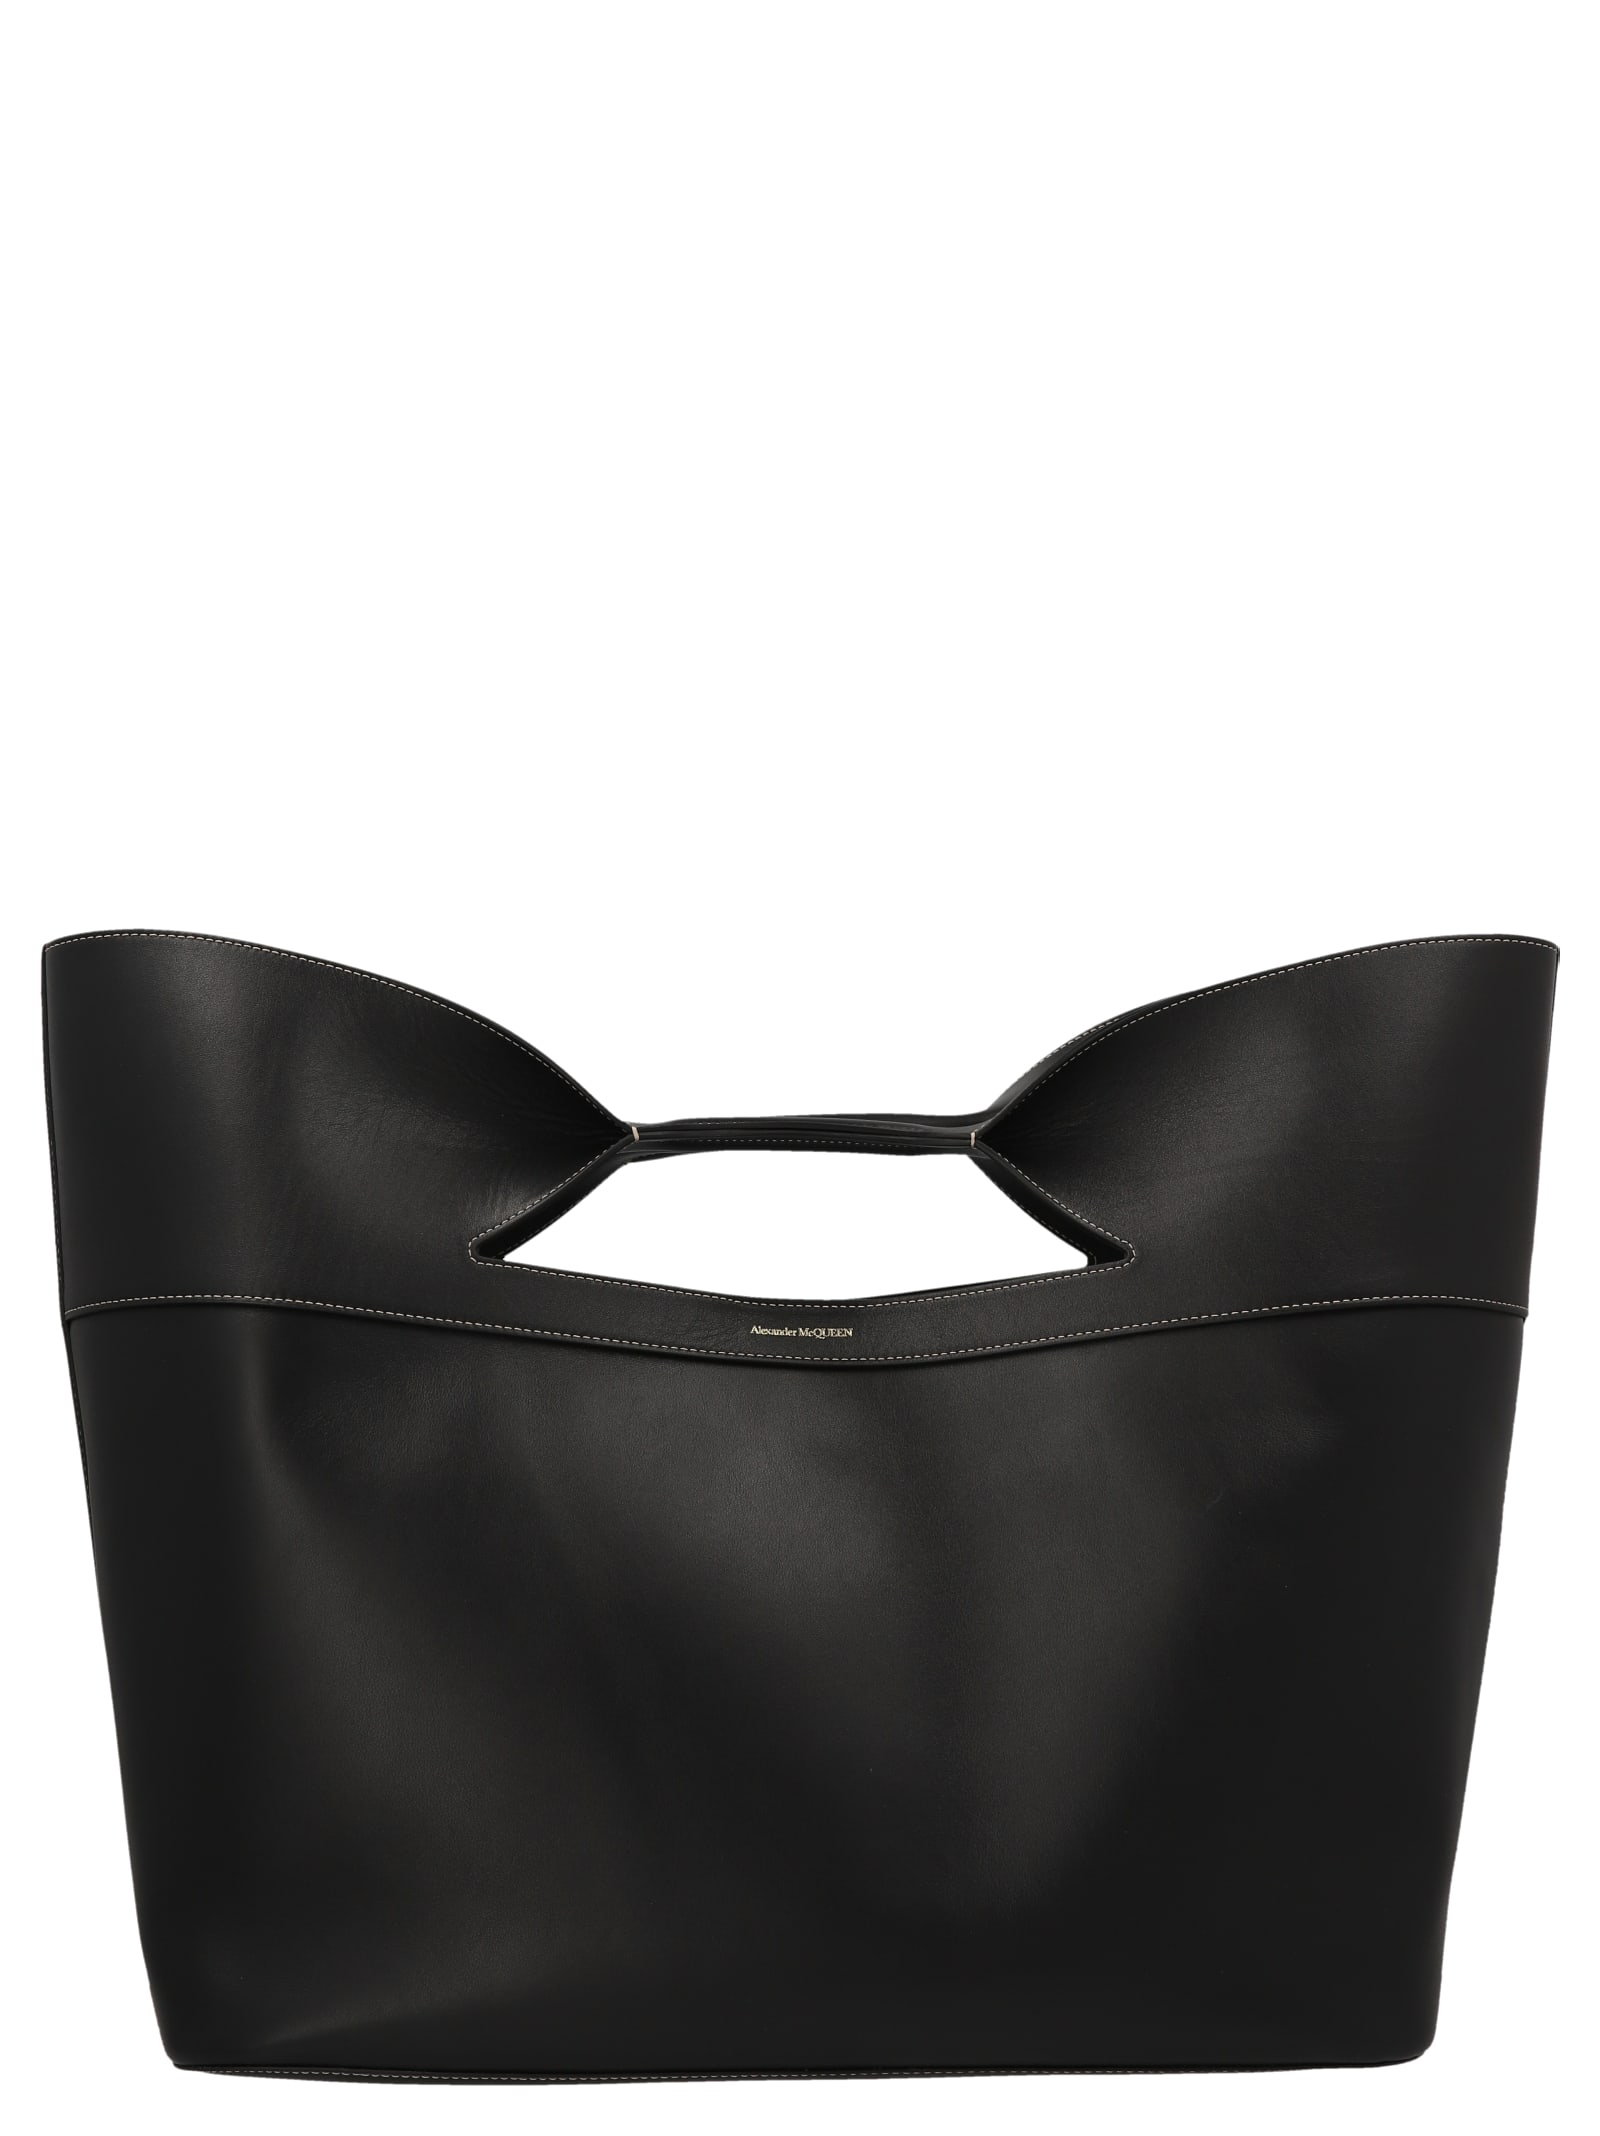 Alexander McQueen The Bow Leather Bag